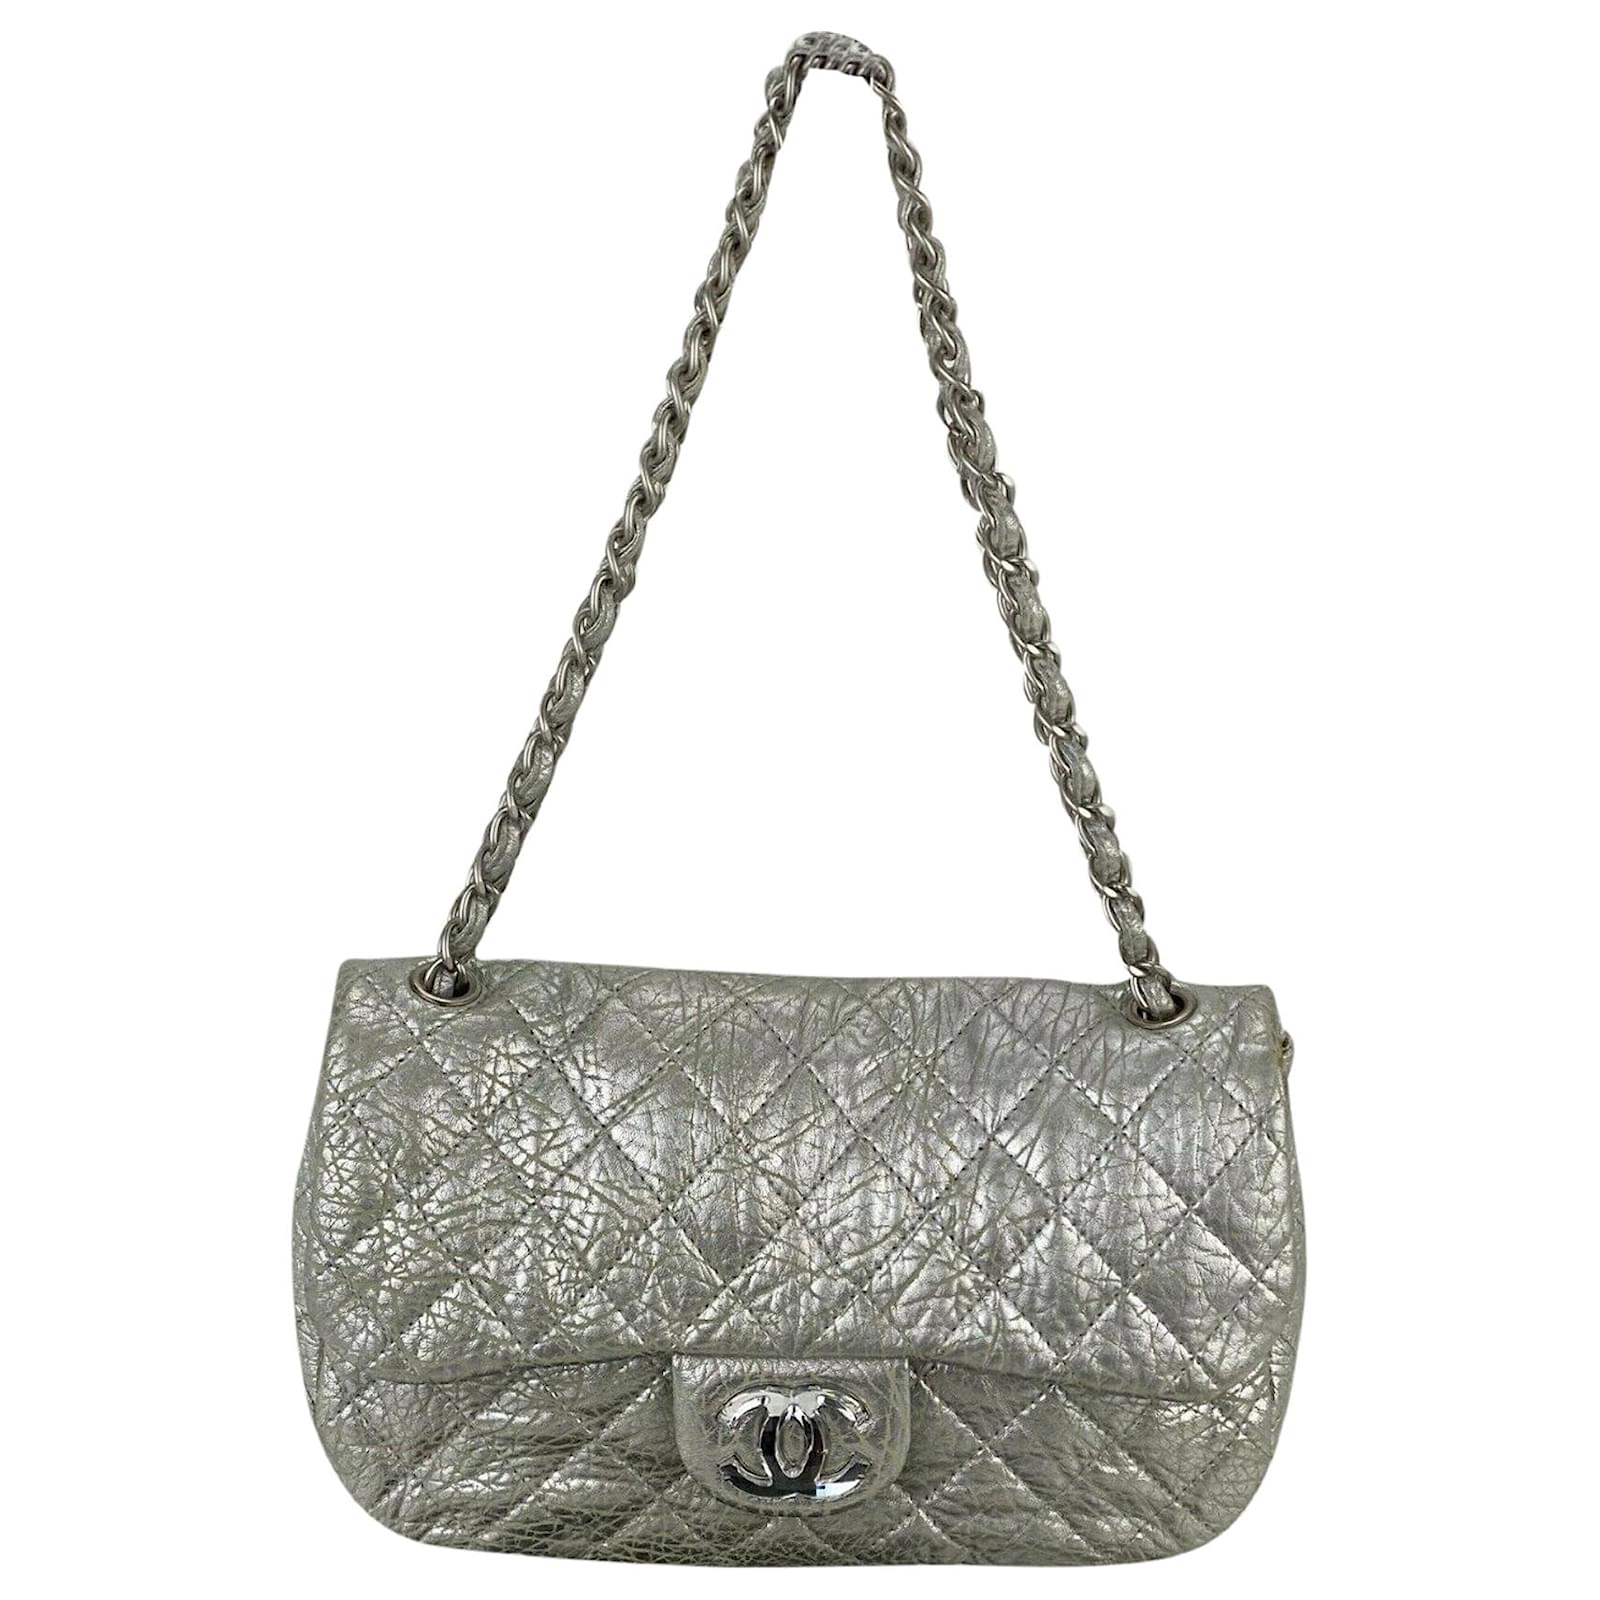 Chanel Chanel Bag Quilted Metallic Silver Jumbo Single Flap Large